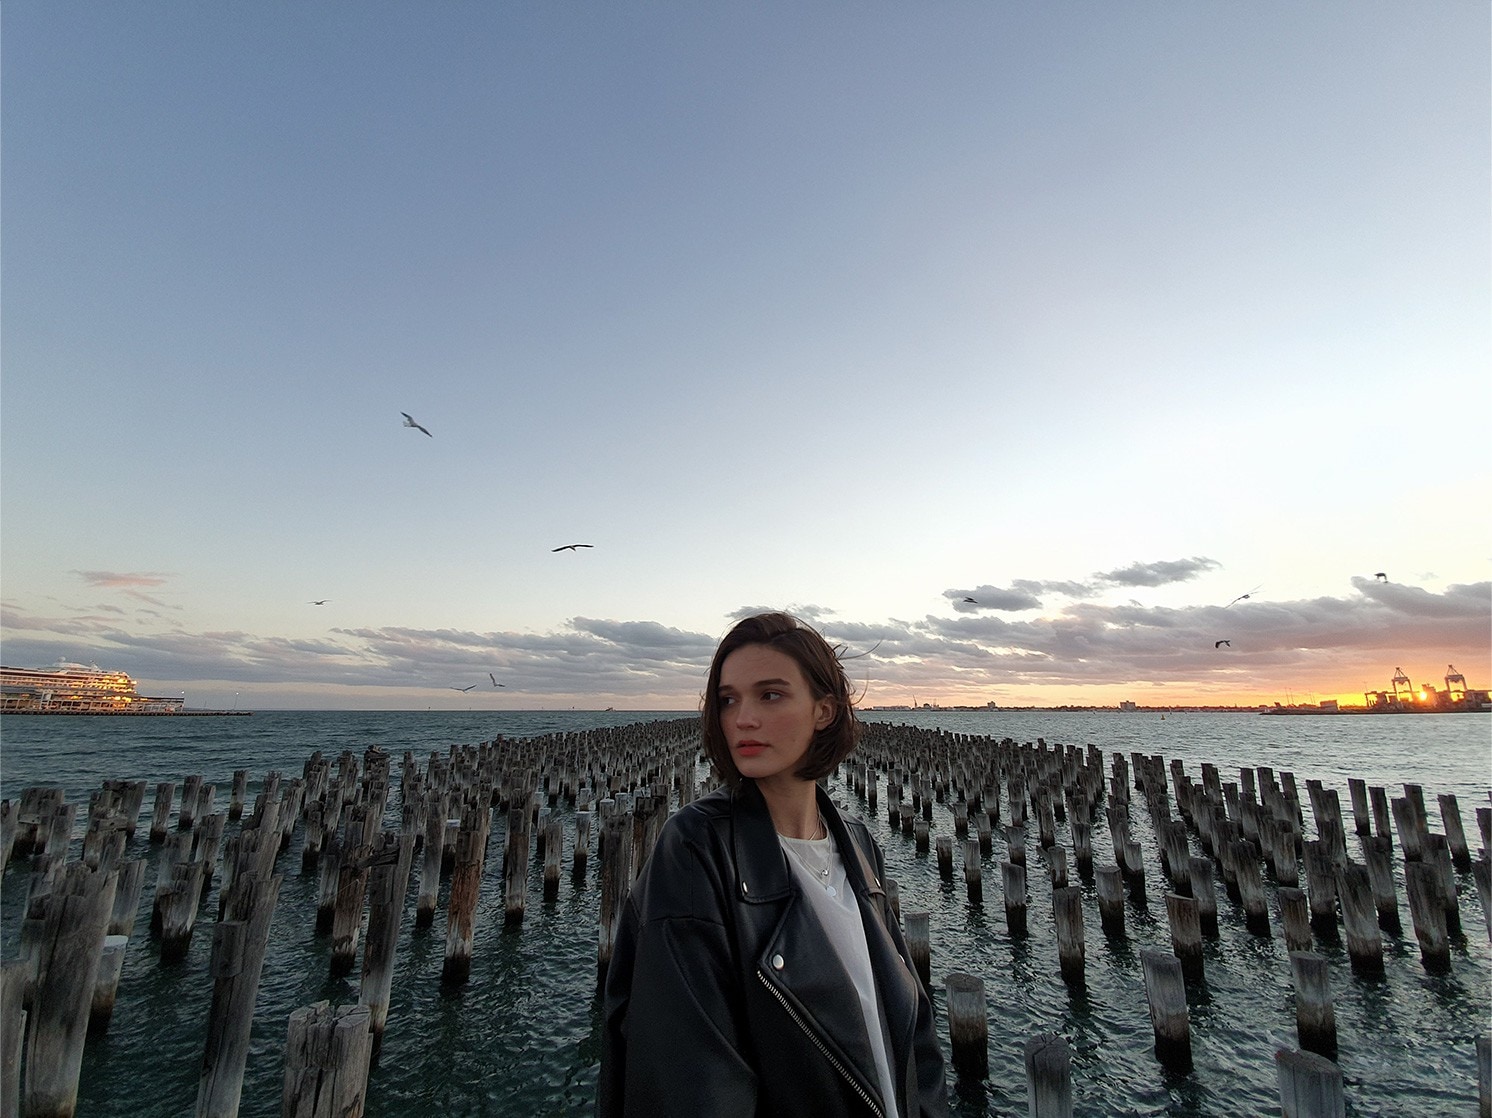 Photo captured by Galaxy S10 plus of a woman standing in front of several wooden posts in the sea at dusk. It pulls out to show more of the scene, with the Ultra Wide-angle Camera.